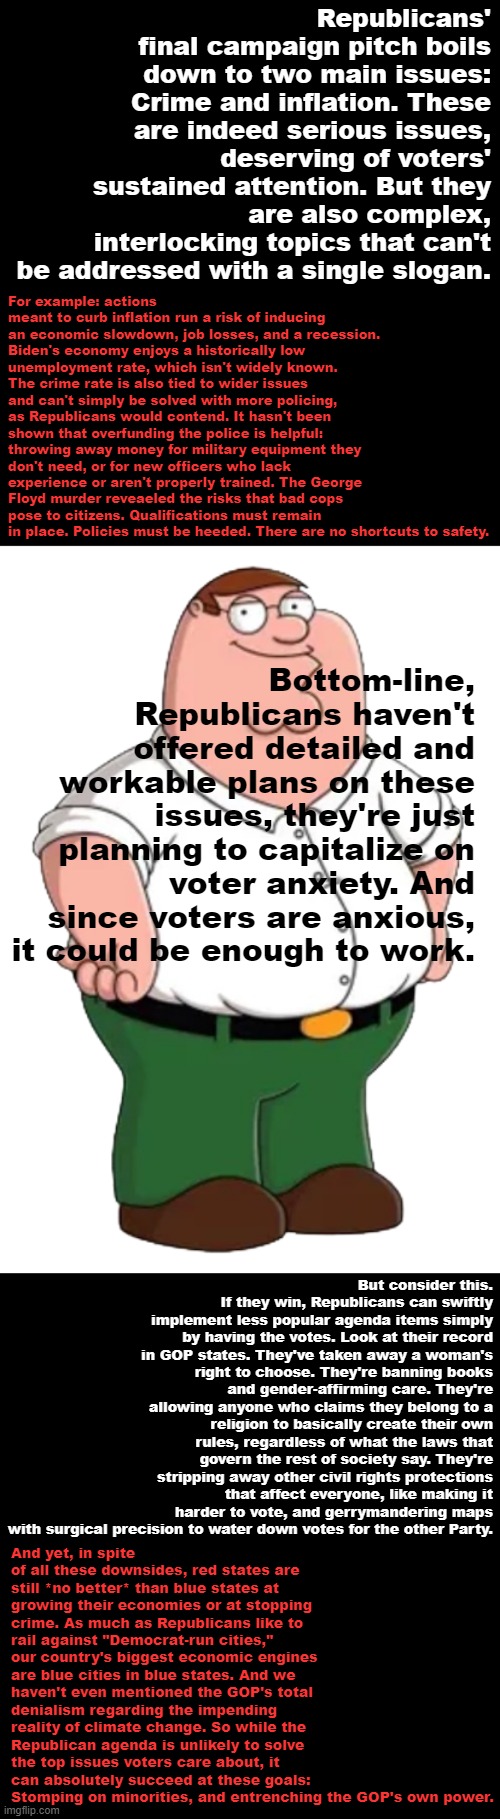 Peter Griffin explains why he's voting Democratic. Thank you for attending his TED talk. | Republicans' final campaign pitch boils down to two main issues: Crime and inflation. These are indeed serious issues, deserving of voters' sustained attention. But they are also complex, interlocking topics that can't be addressed with a single slogan. For example: actions meant to curb inflation run a risk of inducing an economic slowdown, job losses, and a recession. Biden's economy enjoys a historically low unemployment rate, which isn't widely known. The crime rate is also tied to wider issues and can't simply be solved with more policing, as Republicans would contend. It hasn't been shown that overfunding the police is helpful: throwing away money for military equipment they don't need, or for new officers who lack experience or aren't properly trained. The George Floyd murder reveaeled the risks that bad cops pose to citizens. Qualifications must remain in place. Policies must be heeded. There are no shortcuts to safety. Bottom-line, Republicans haven't offered detailed and workable plans on these issues, they're just planning to capitalize on voter anxiety. And since voters are anxious, it could be enough to work. But consider this. If they win, Republicans can swiftly implement less popular agenda items simply by having the votes. Look at their record in GOP states. They've taken away a woman's right to choose. They're banning books and gender-affirming care. They're allowing anyone who claims they belong to a religion to basically create their own rules, regardless of what the laws that govern the rest of society say. They're stripping away other civil rights protections that affect everyone, like making it harder to vote, and gerrymandering maps with surgical precision to water down votes for the other Party. And yet, in spite of all these downsides, red states are still *no better* than blue states at growing their economies or at stopping crime. As much as Republicans like to rail against "Democrat-run cities," our country's biggest economic engines are blue cities in blue states. And we haven't even mentioned the GOP's total denialism regarding the impending reality of climate change. So while the Republican agenda is unlikely to solve the top issues voters care about, it can absolutely succeed at these goals: Stomping on minorities, and entrenching the GOP's own power. | image tagged in peter griffin transparent,democratic party,midterms,2022,inflation,crime | made w/ Imgflip meme maker